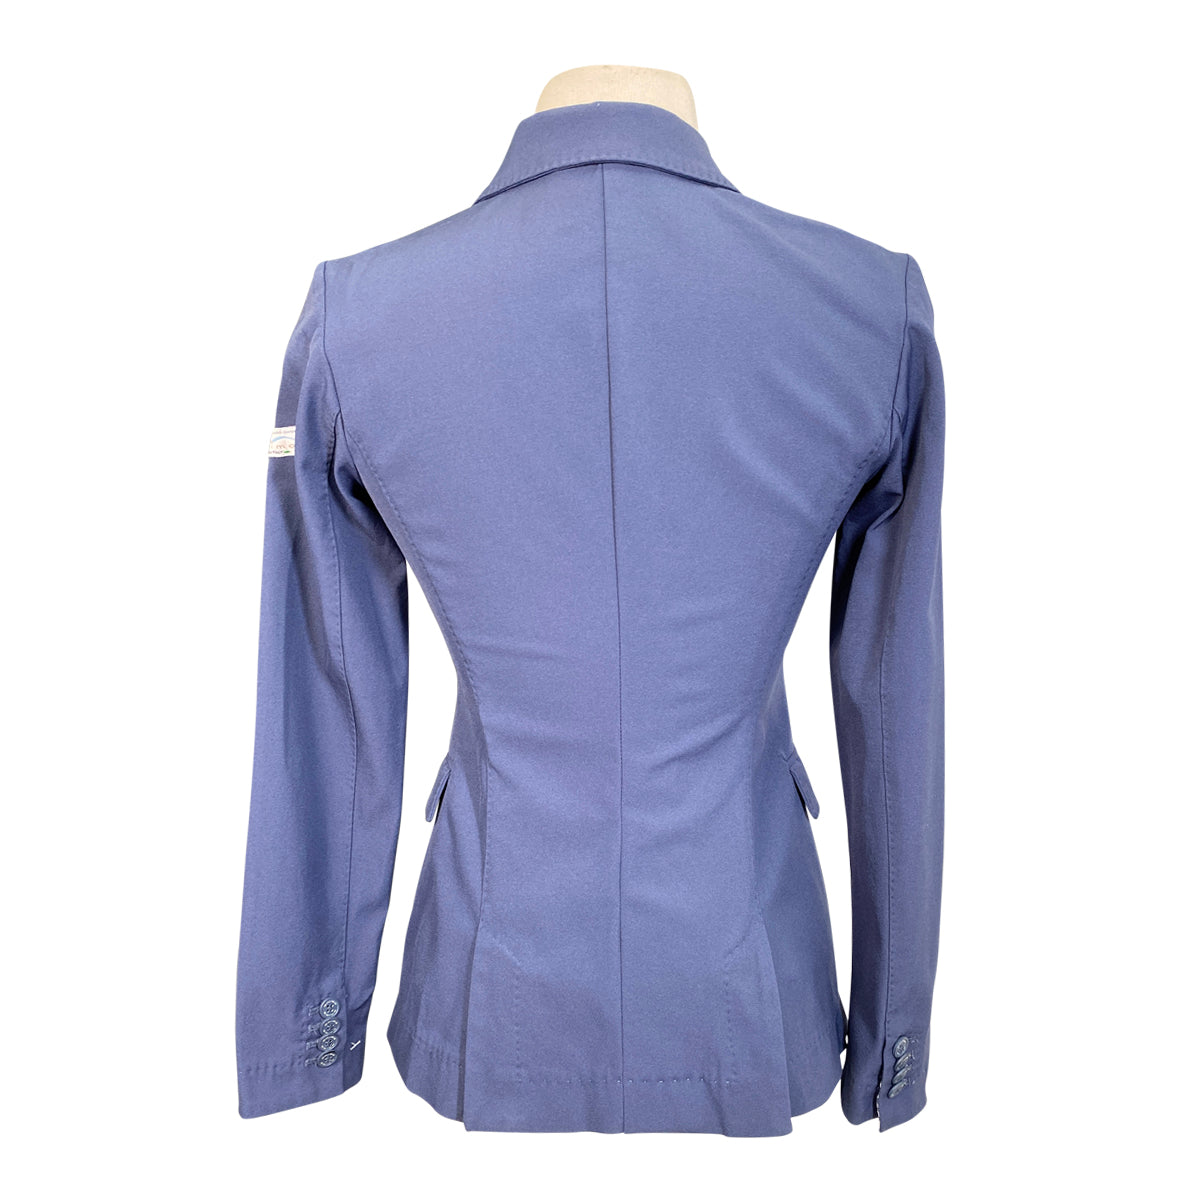 Animo Competition Jacket in Blue Grey